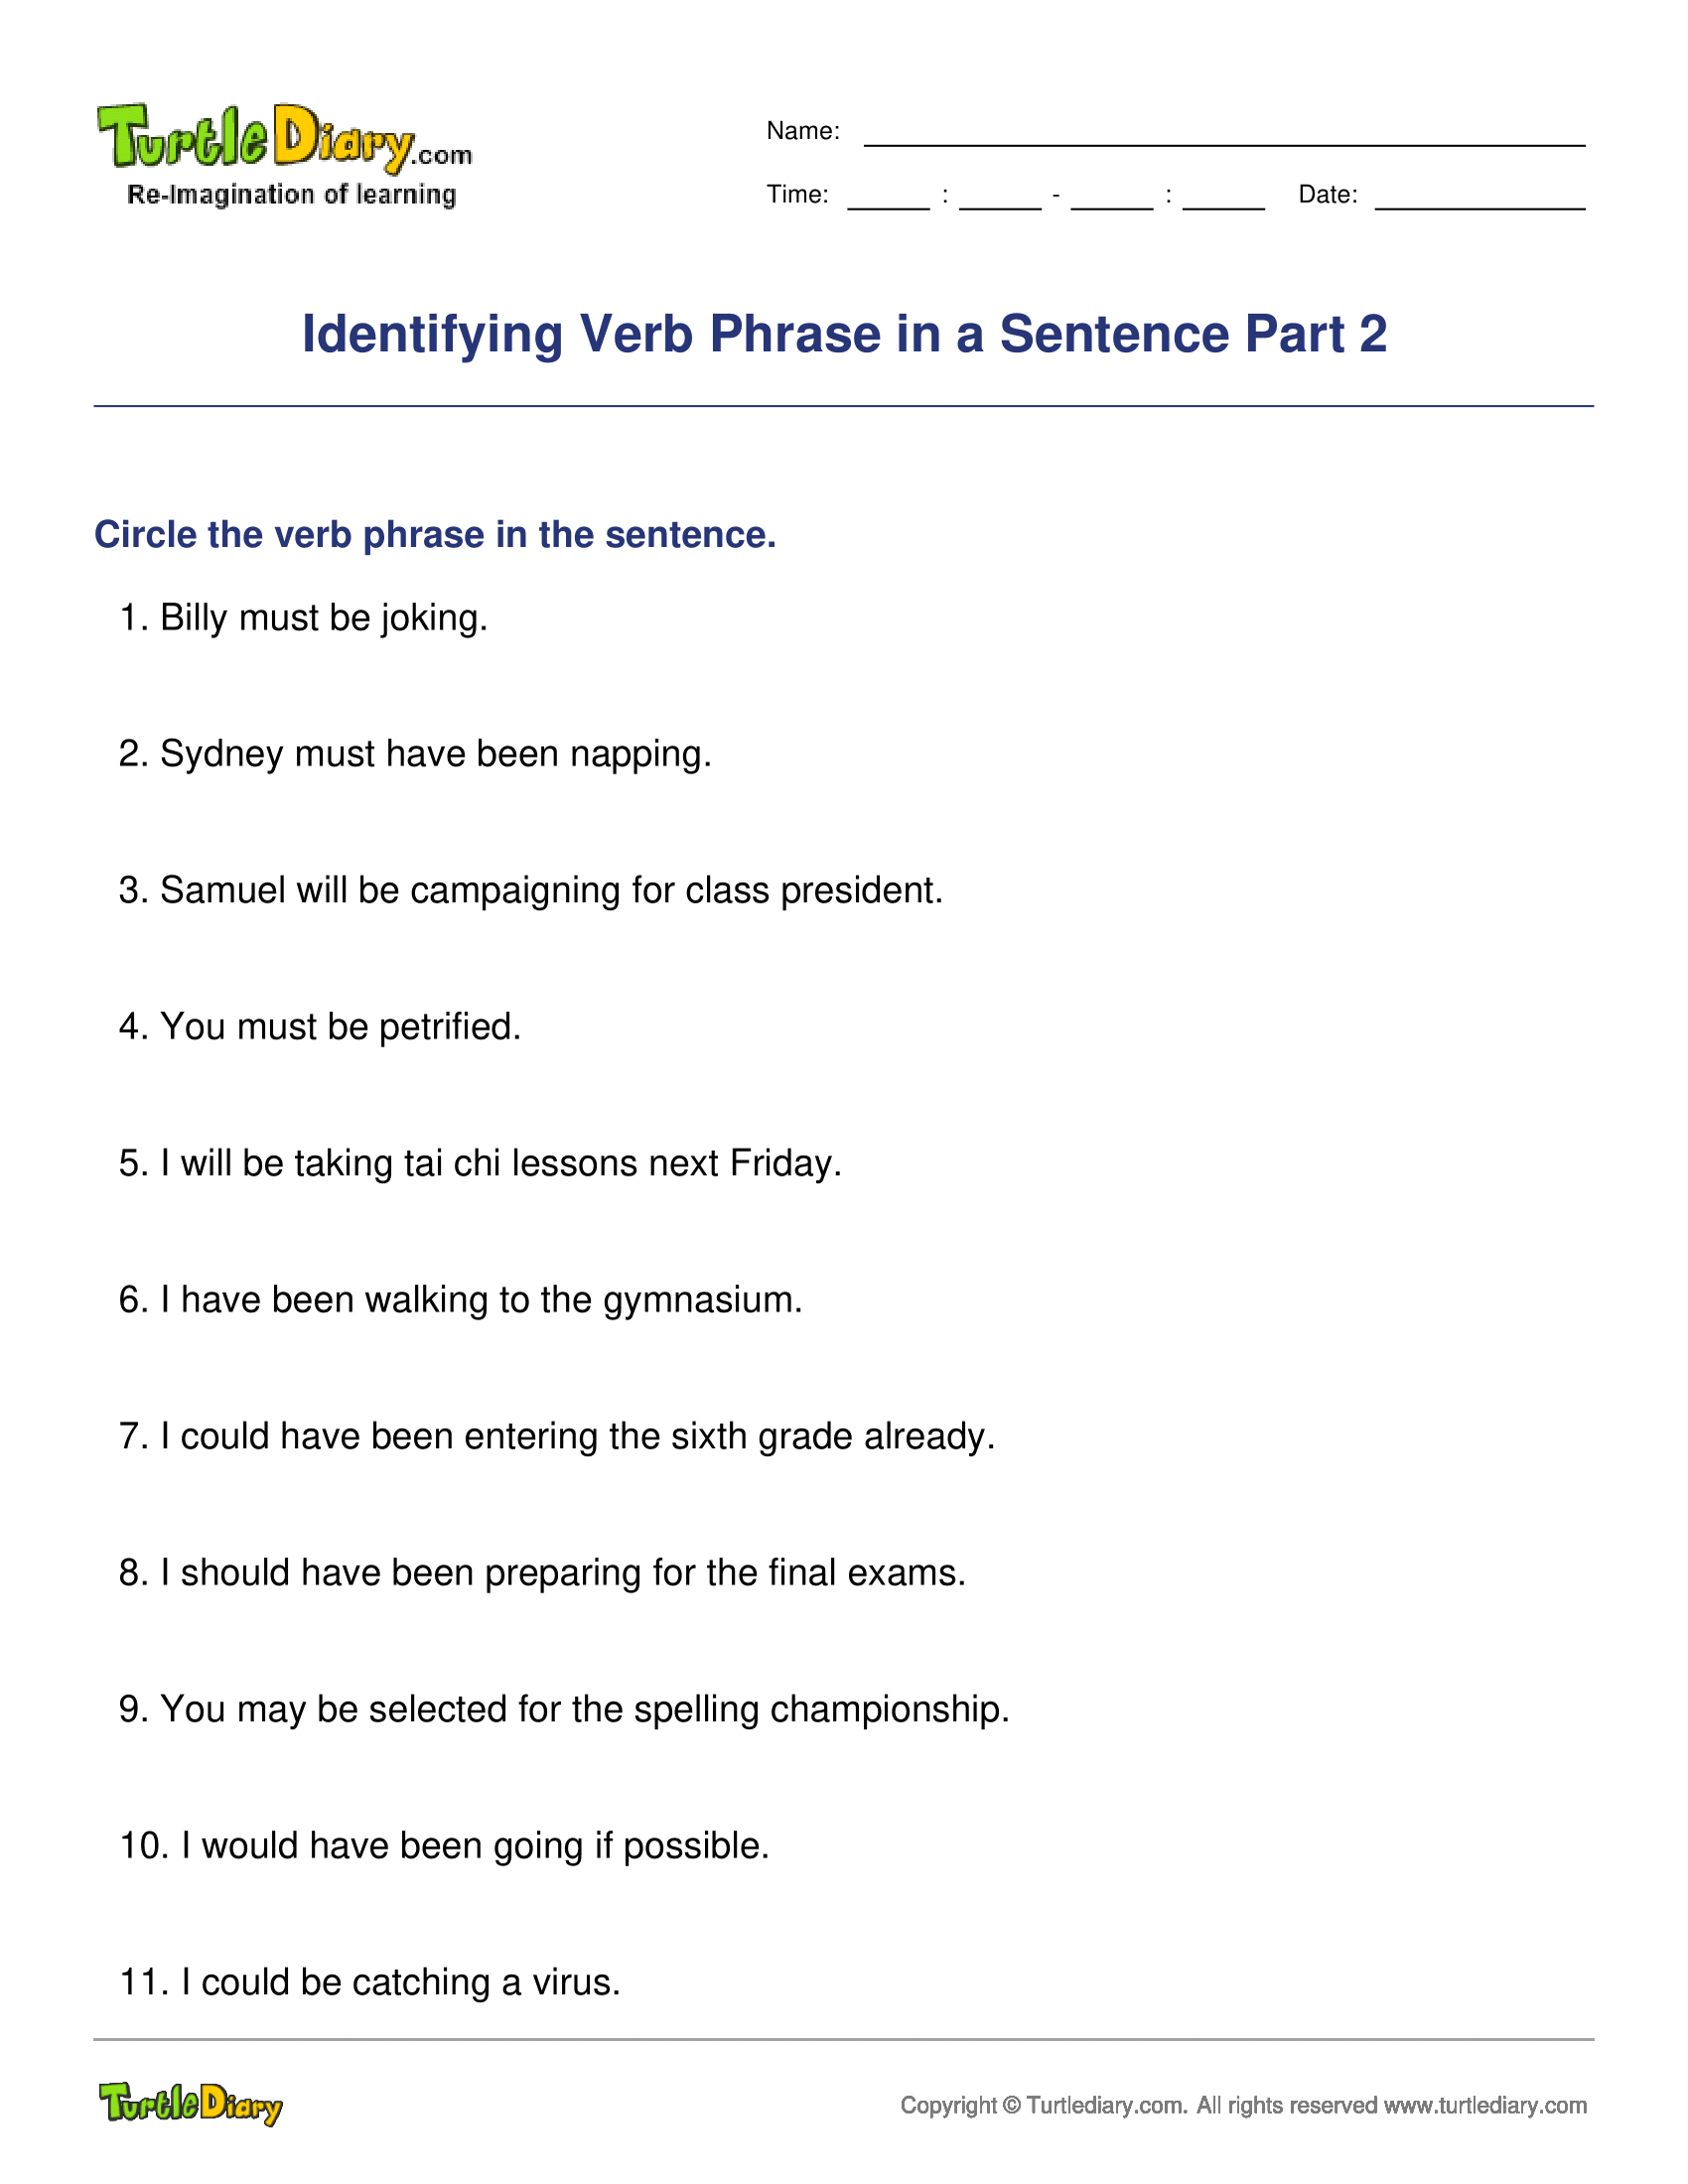 Identifying Verb Phrase in a Sentence Part 2